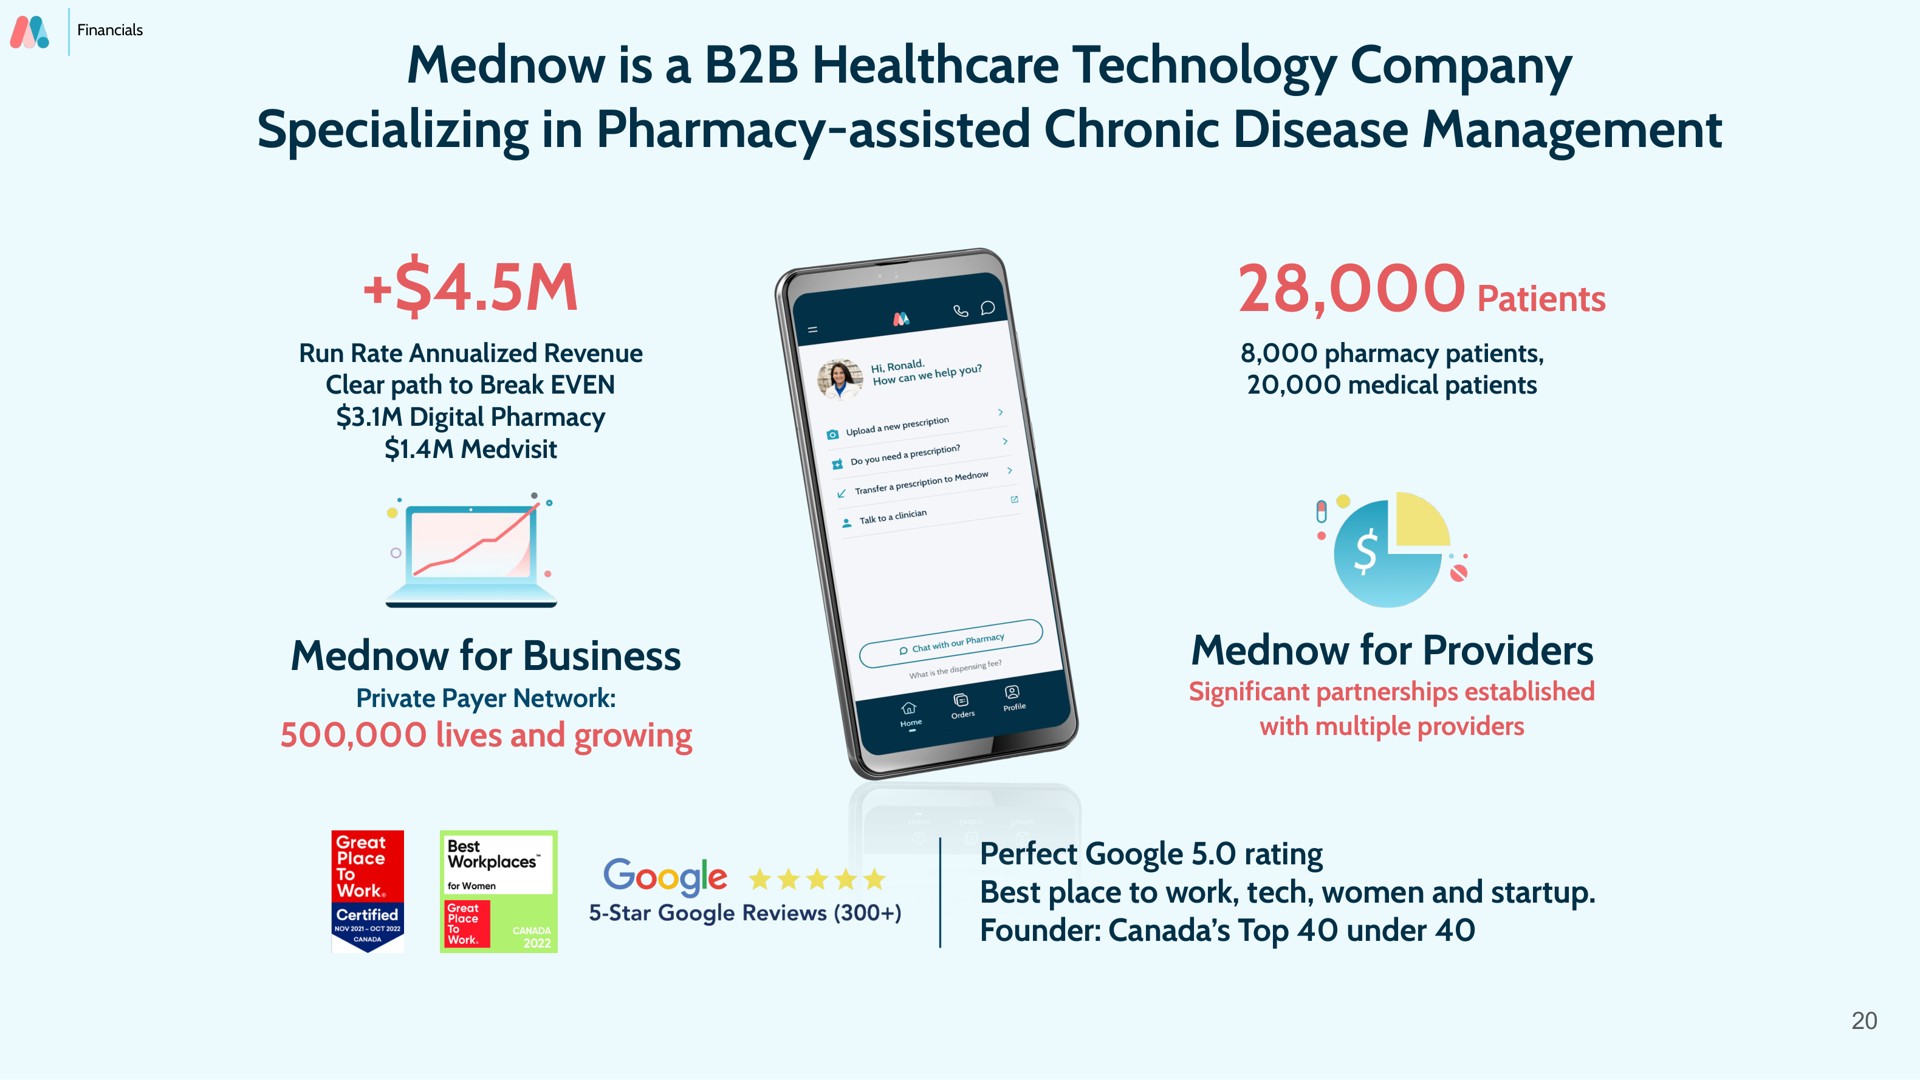 is a technology company specializing in pharmacy assisted chronic disease management for business | Mednow